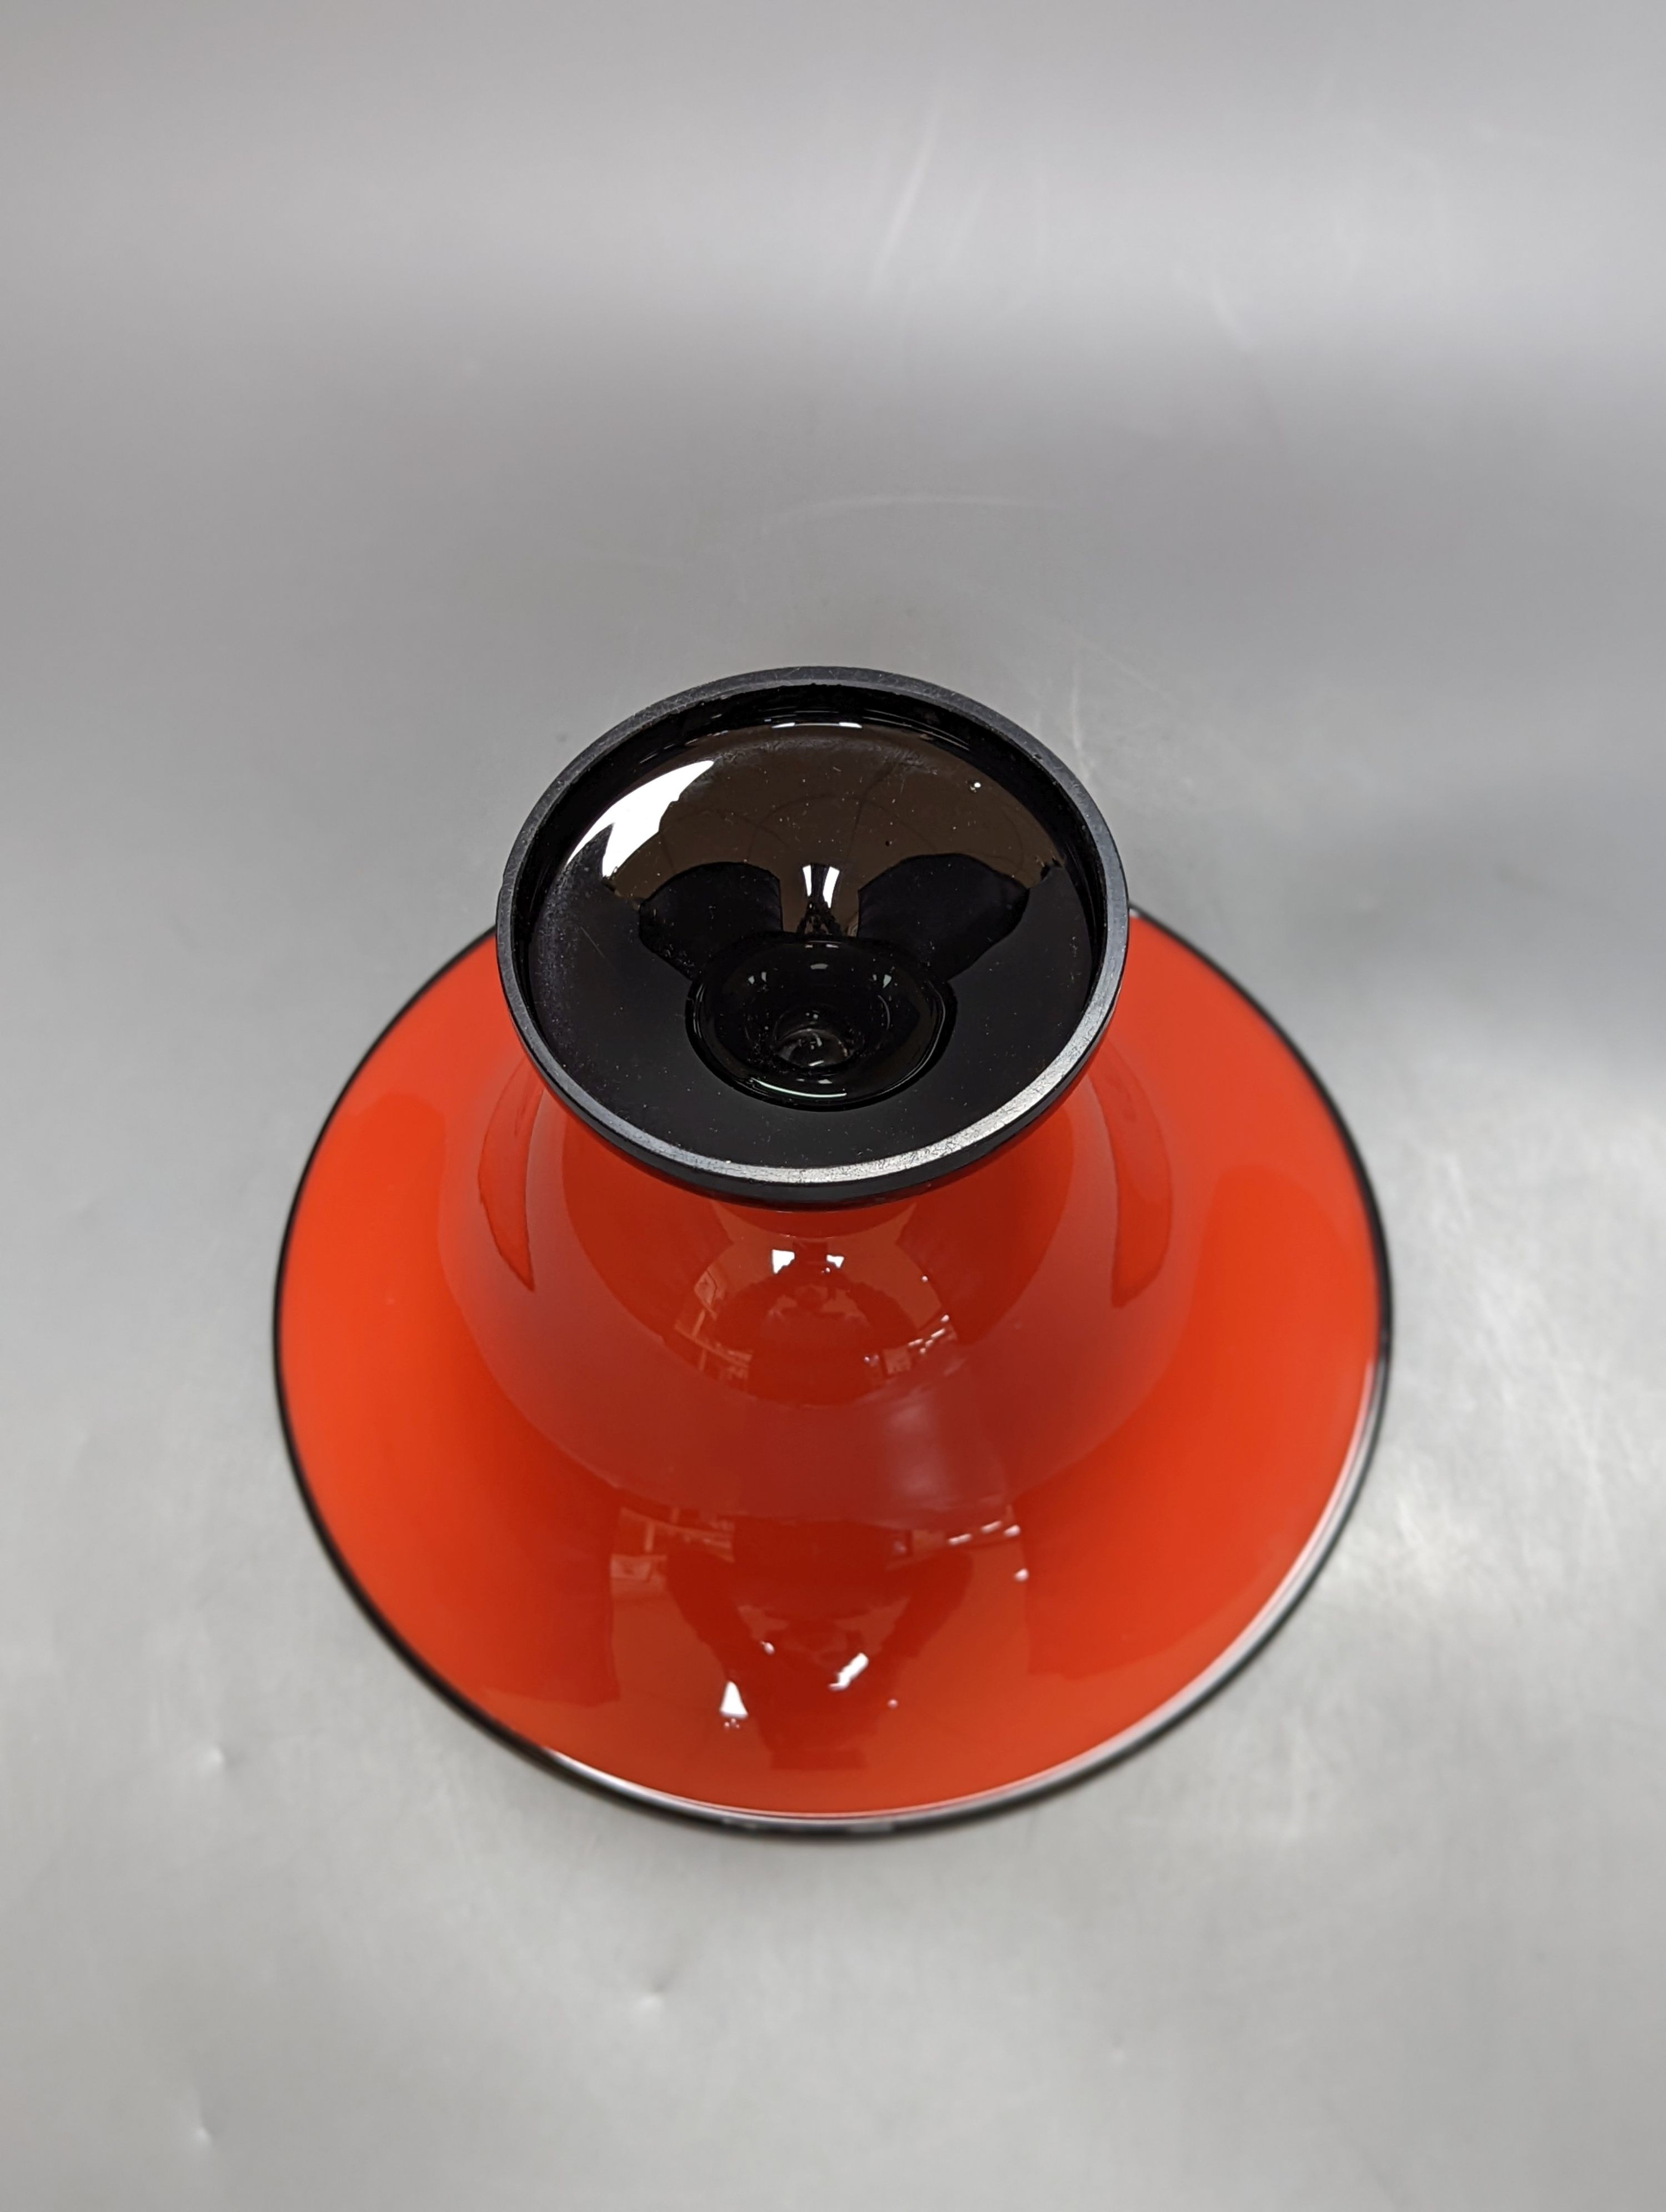 Attributed to Michael Powolny for Loetz. A red and black glass pedestal bowl, 1920s, diameter 22.5cm